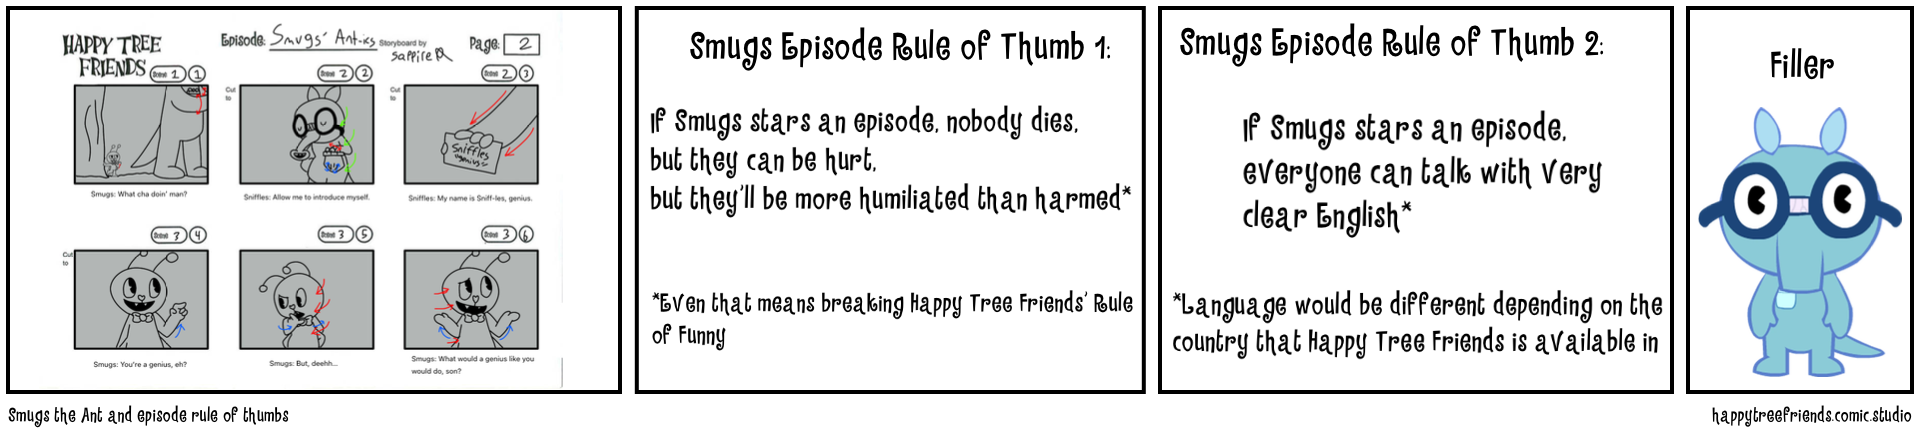 Smugs the Ant and episode rule of thumbs